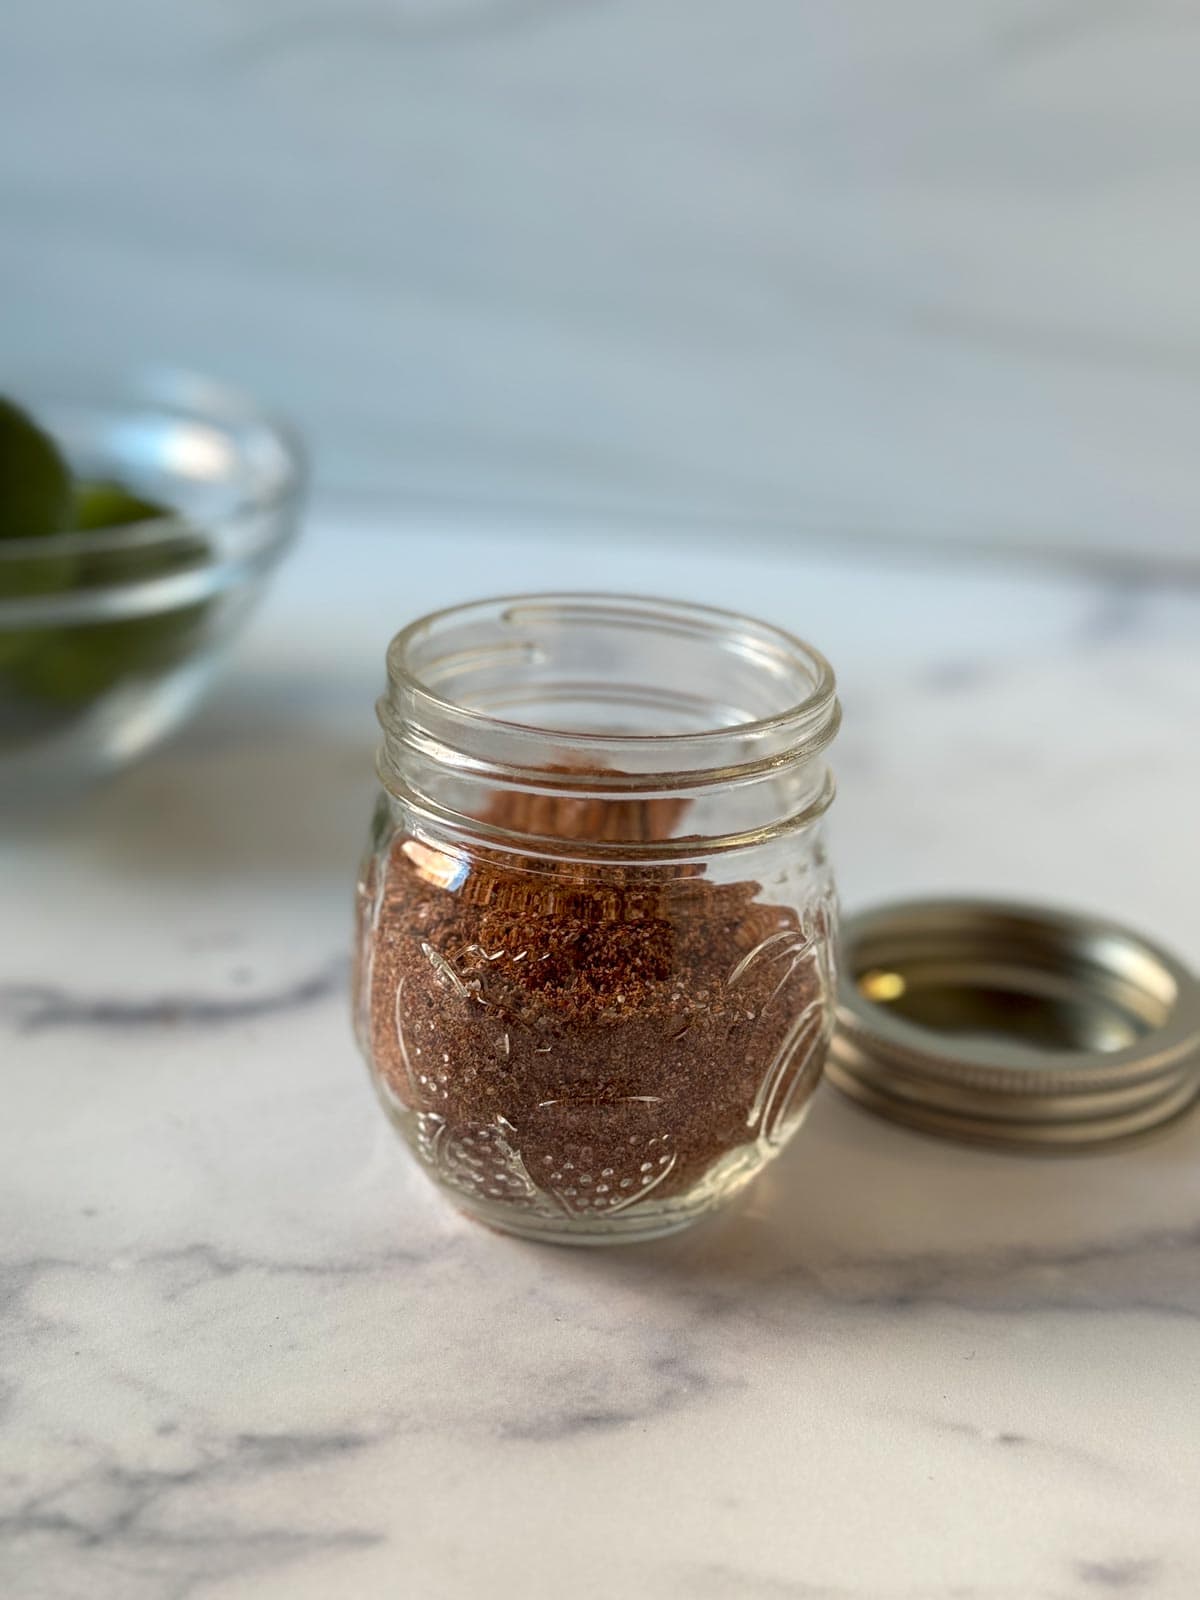 A glass jar filled with homemade taco seasoning on a countertop.